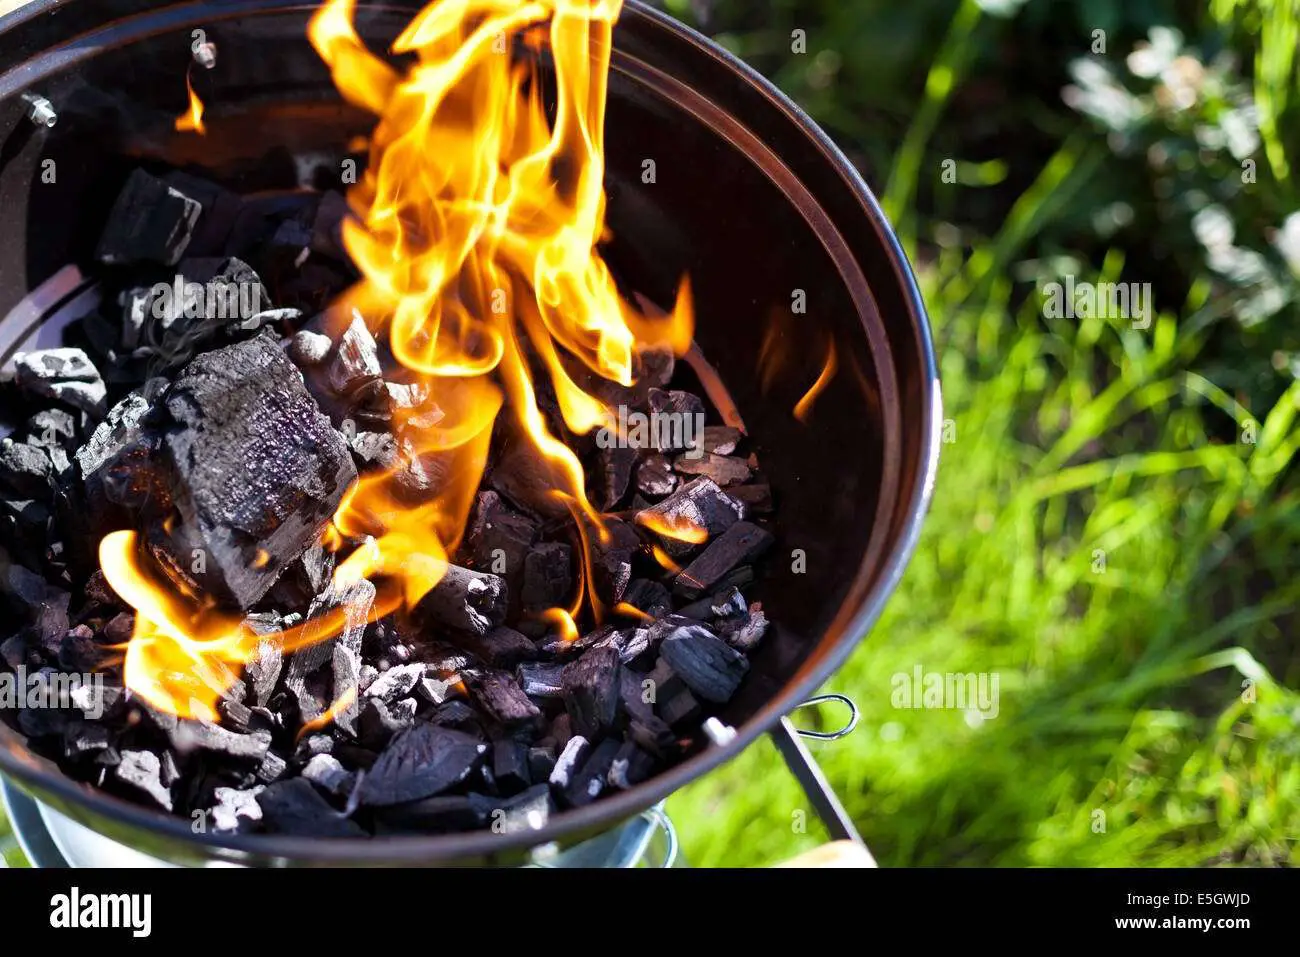 Hot burning charcoal, grill on fire Stock Photo: 72286101